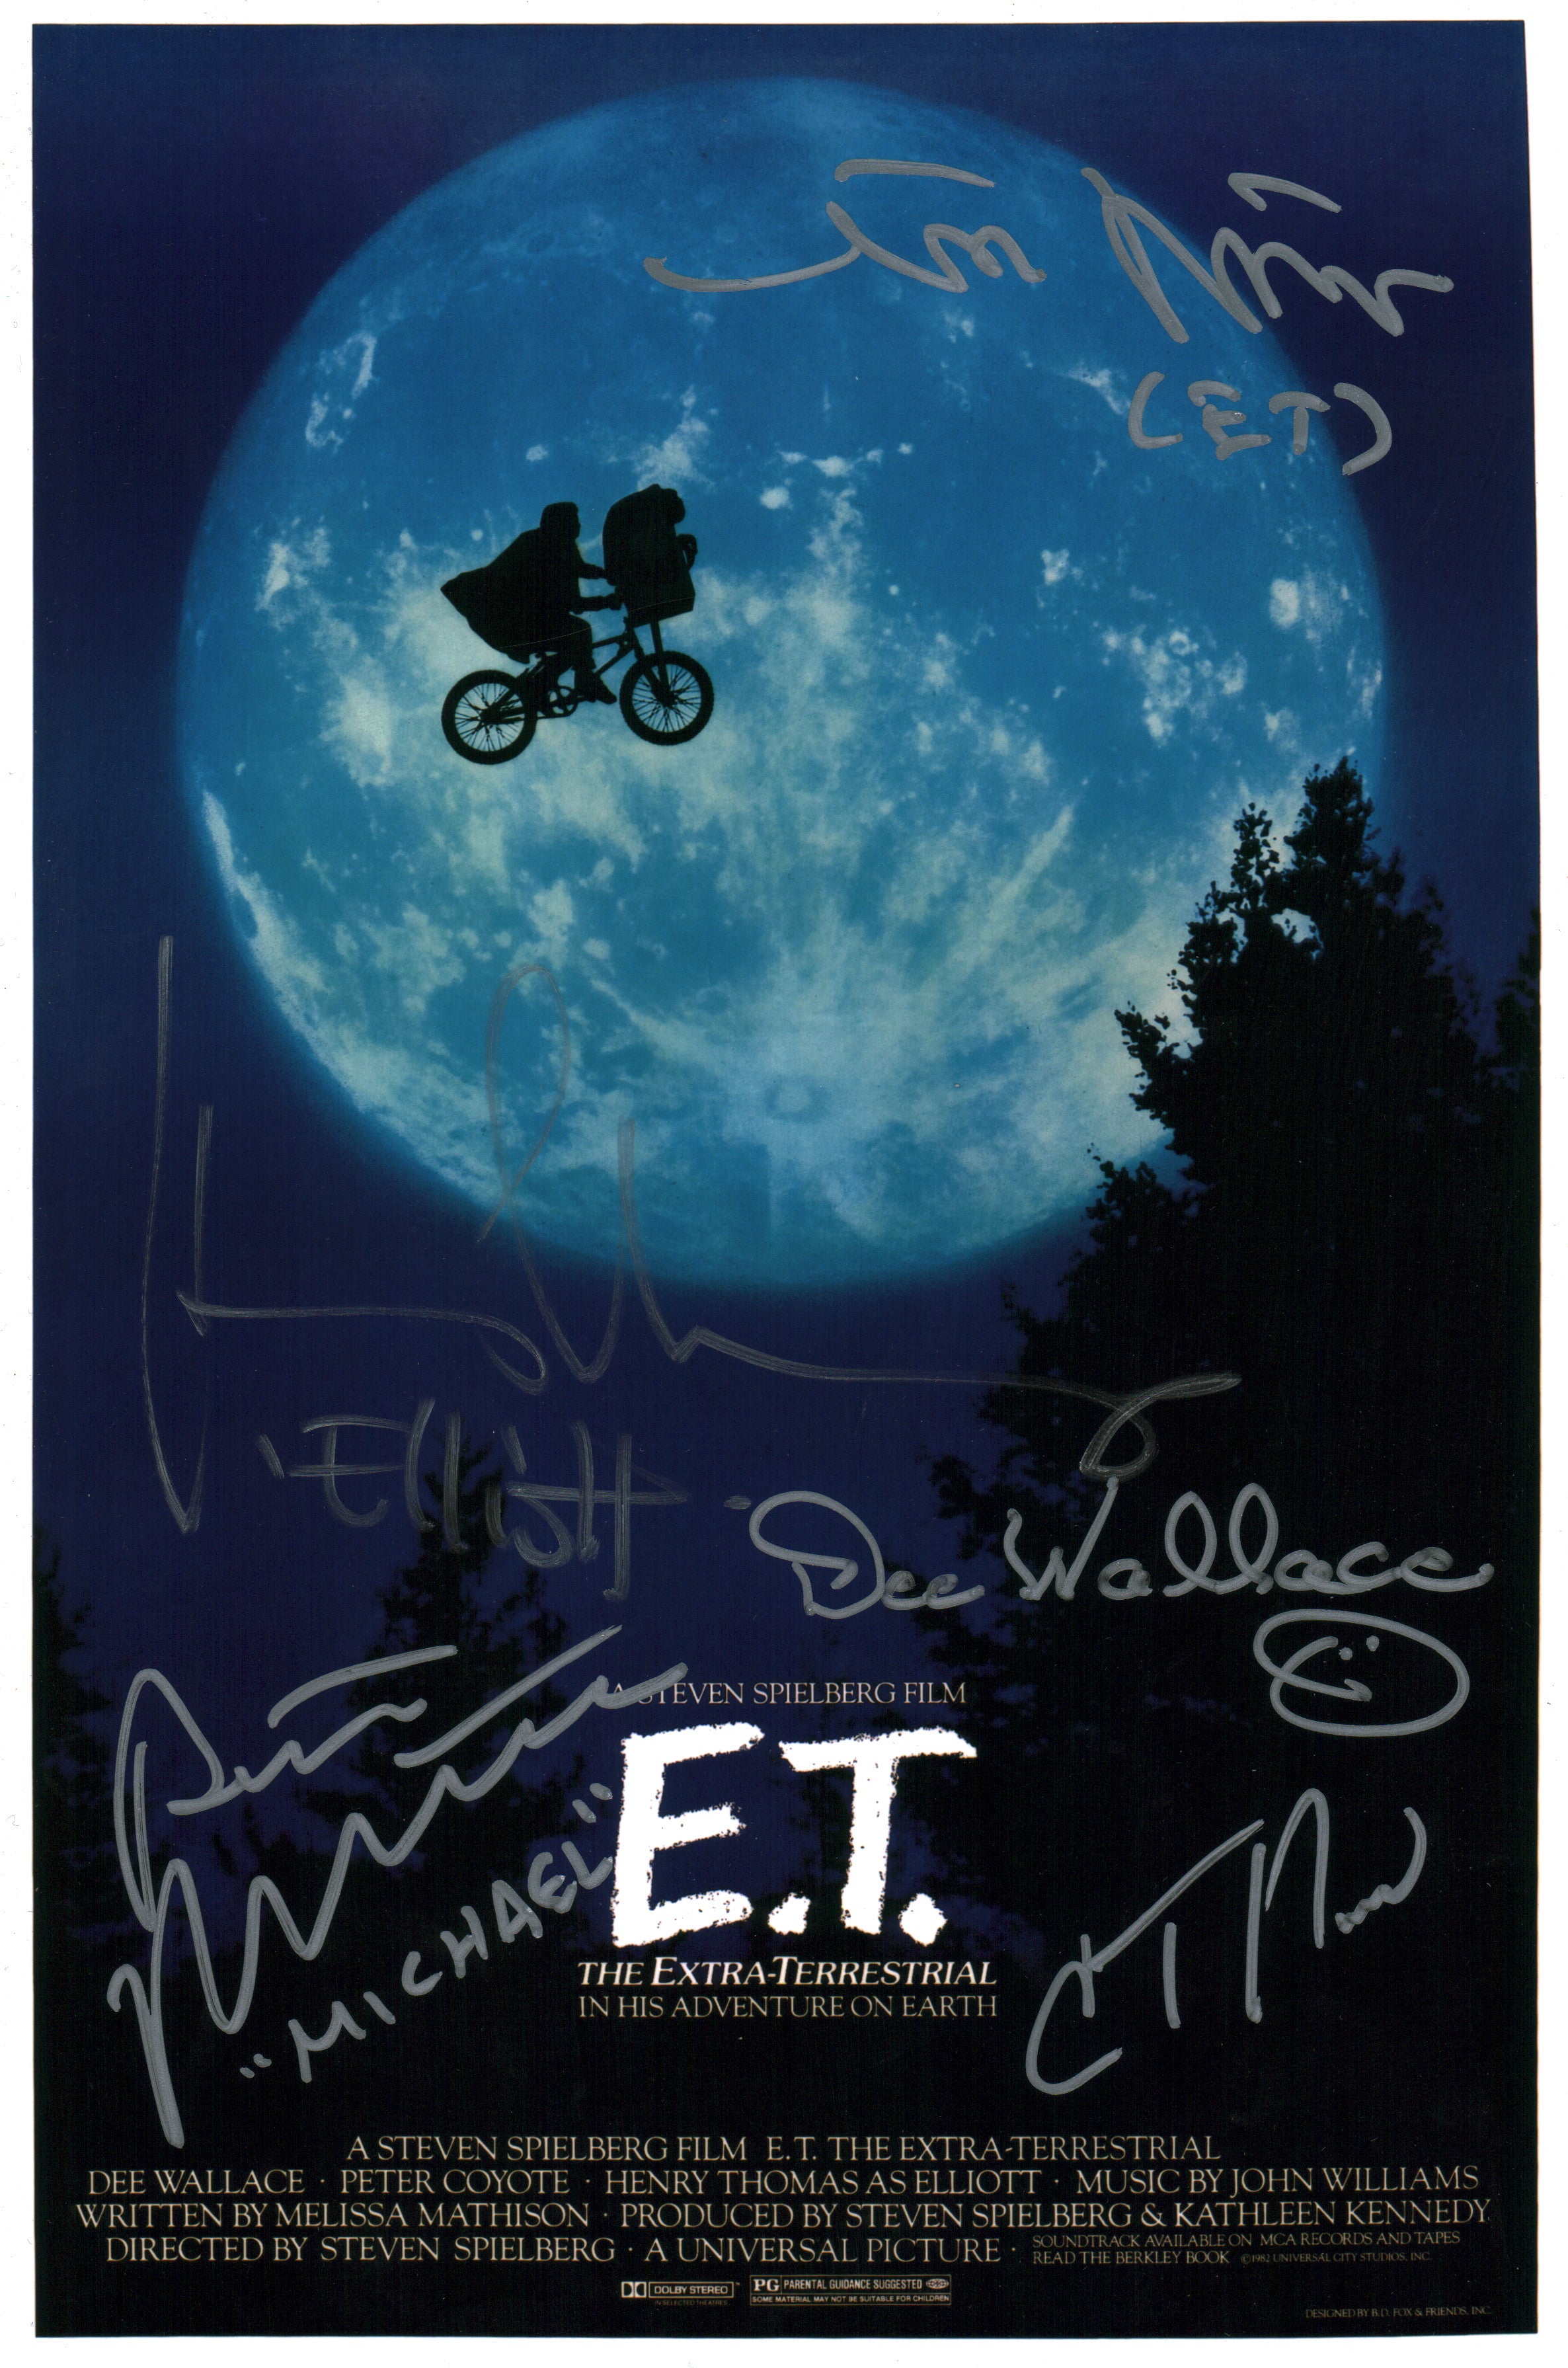 ET The Extra Terrestrial 8x12 Cast x5 DeMerrit Thomas Wallace MacNaughton Howell Photo Poster JSA Certified Autograph